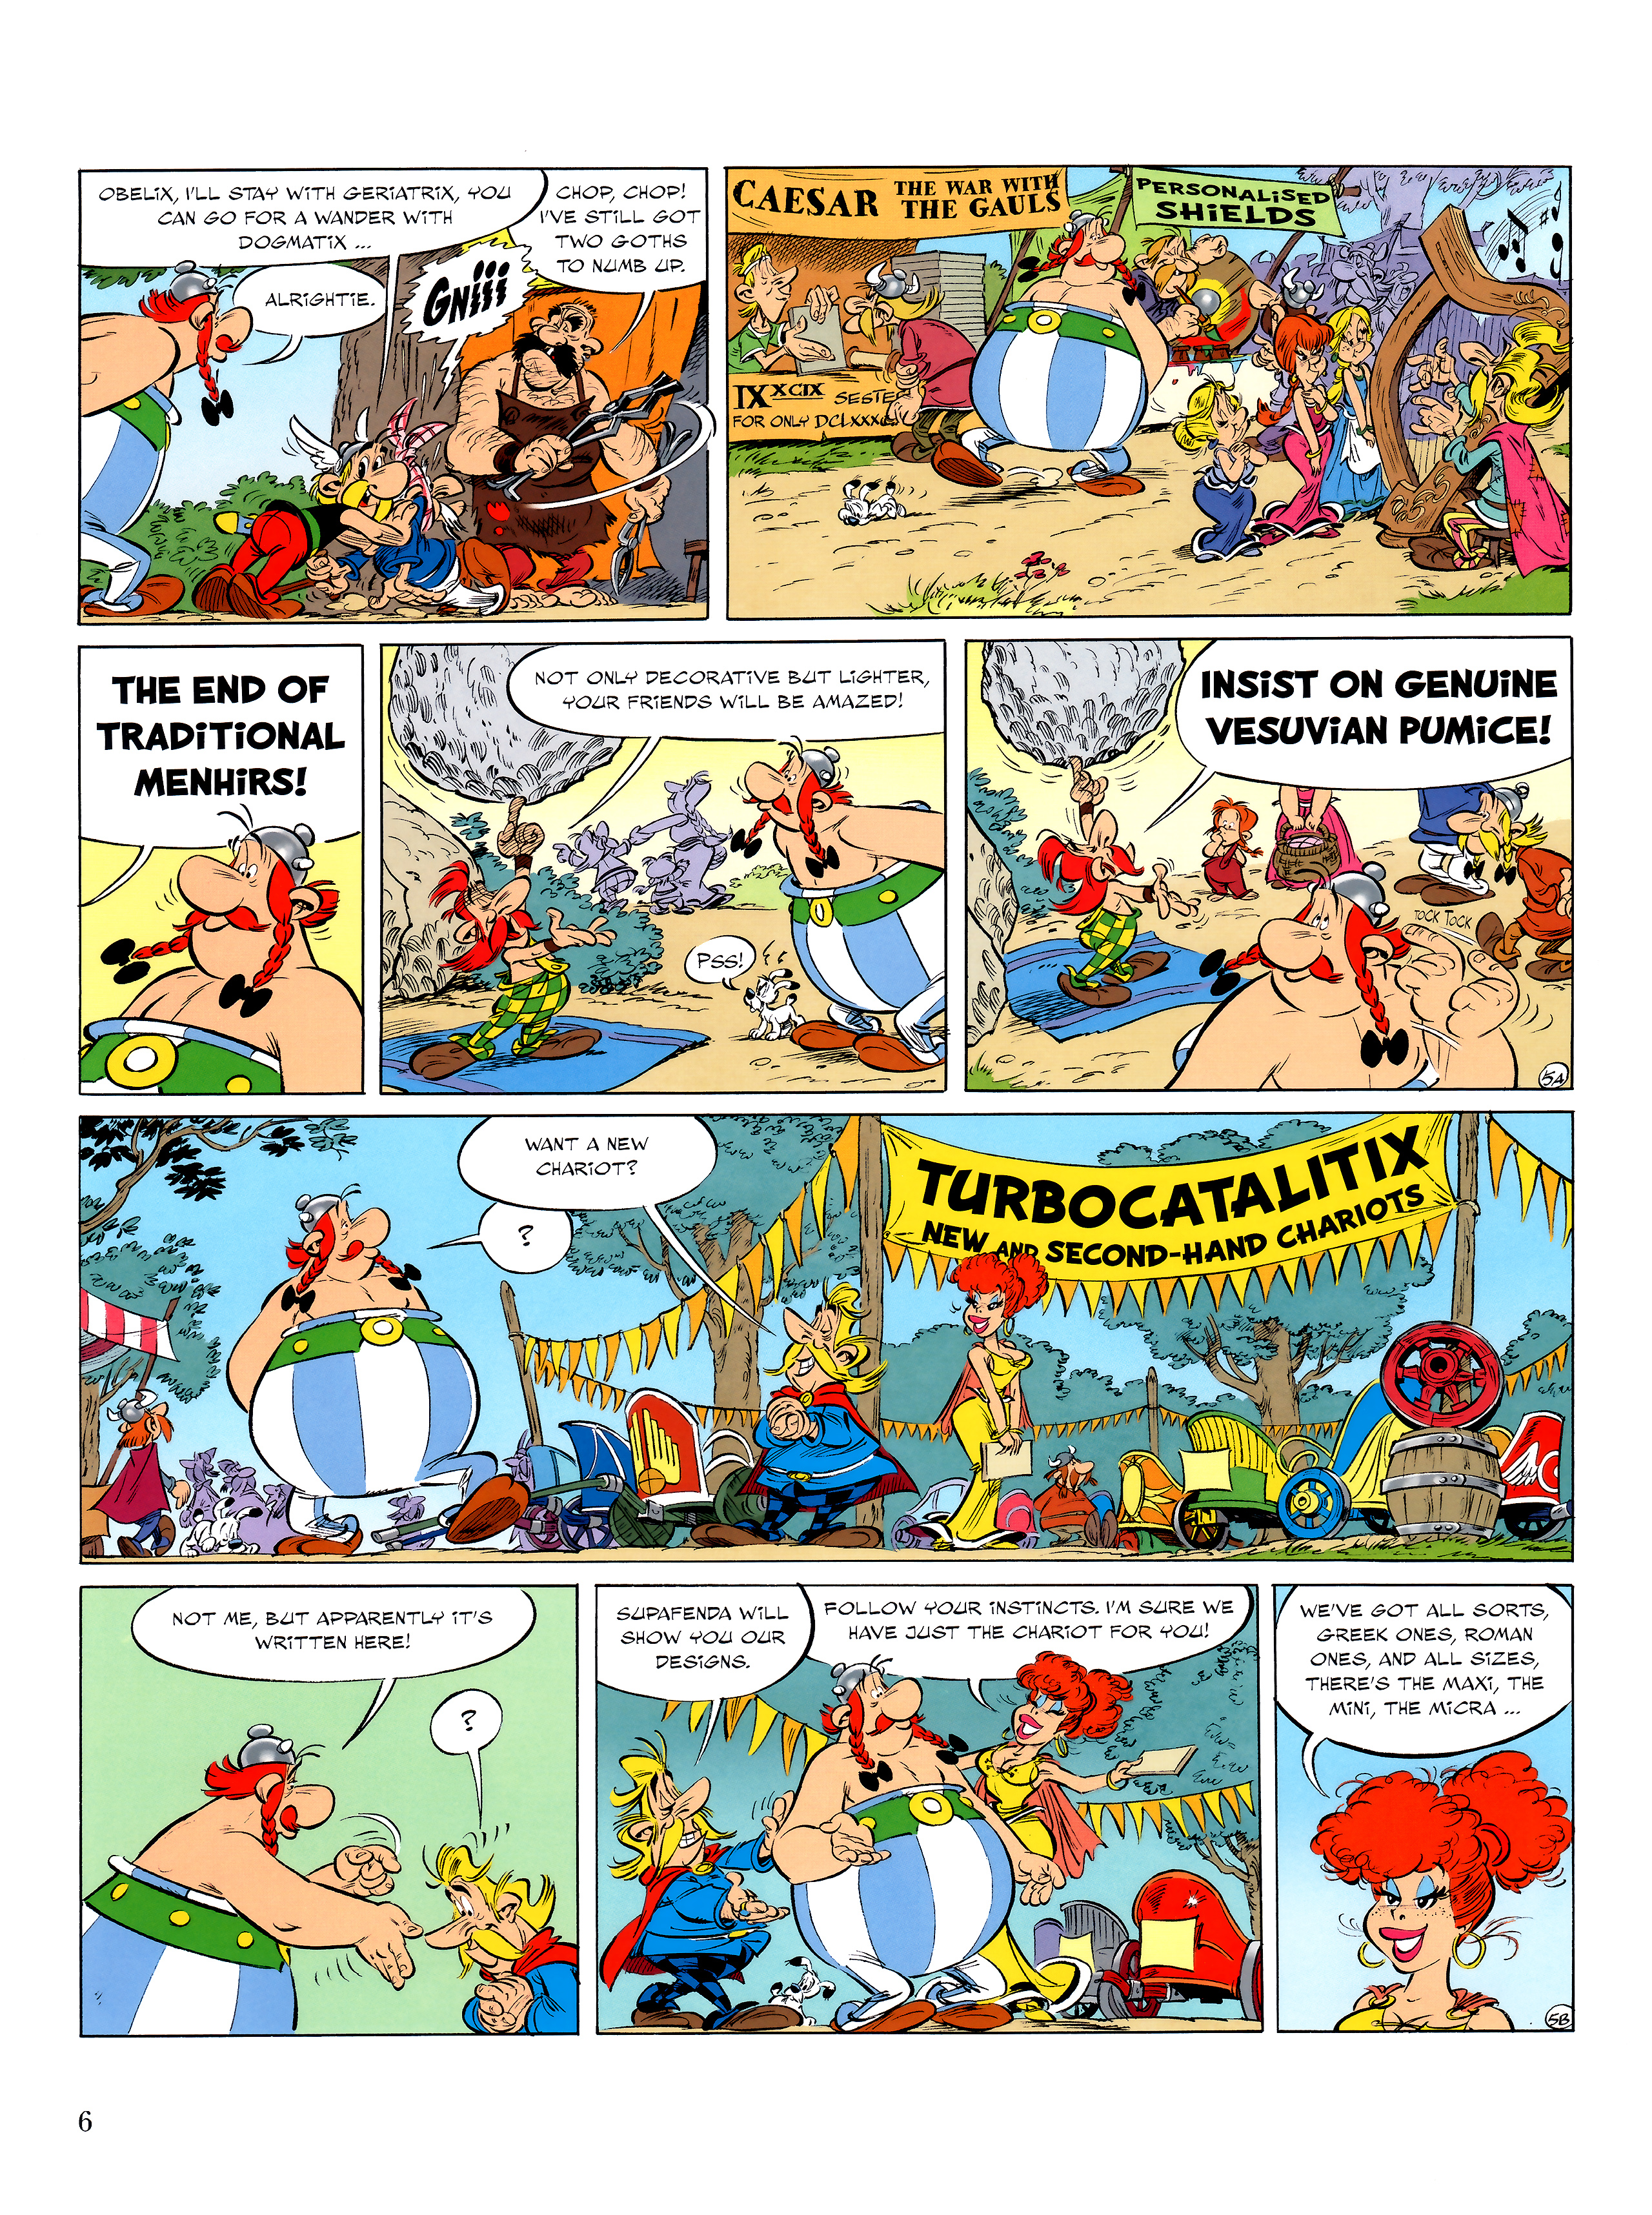 Read online Asterix comic -  Issue #37 - 7